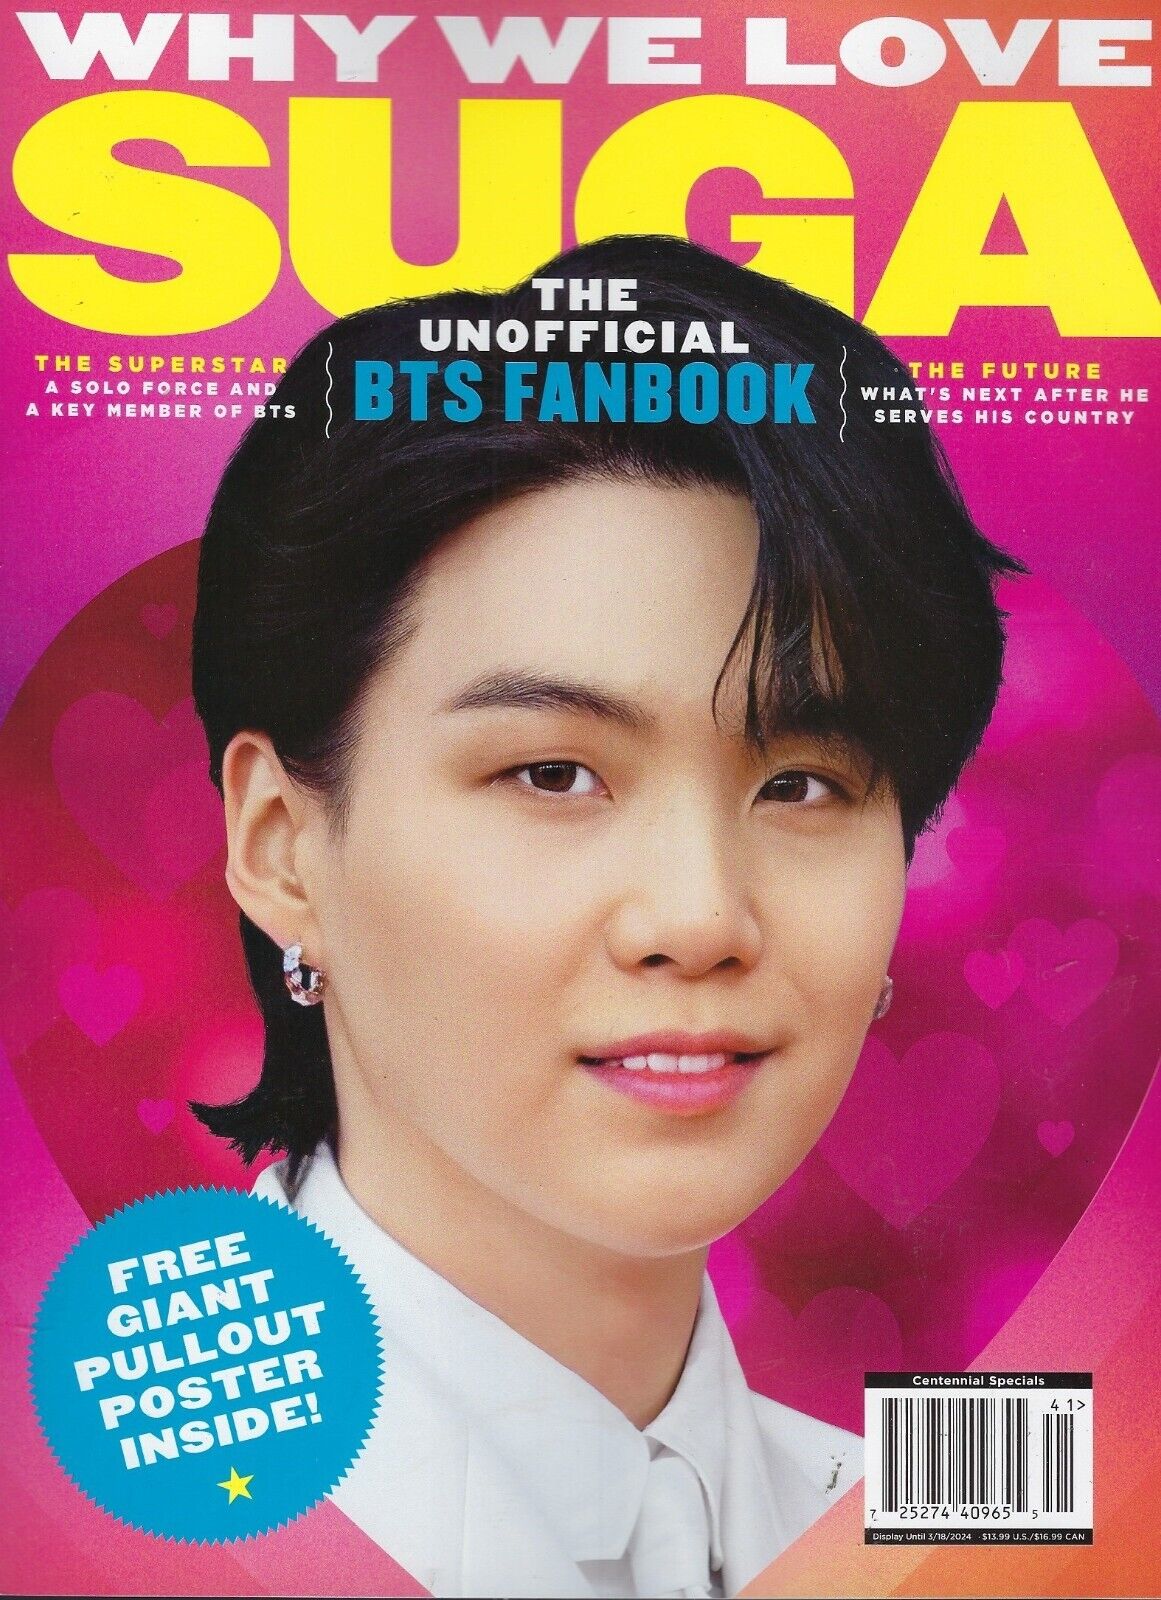 Why we love SUGA The Unofficial BTS Fan Book 82 Pages With Poster (FRE -  YourCelebrityMagazines